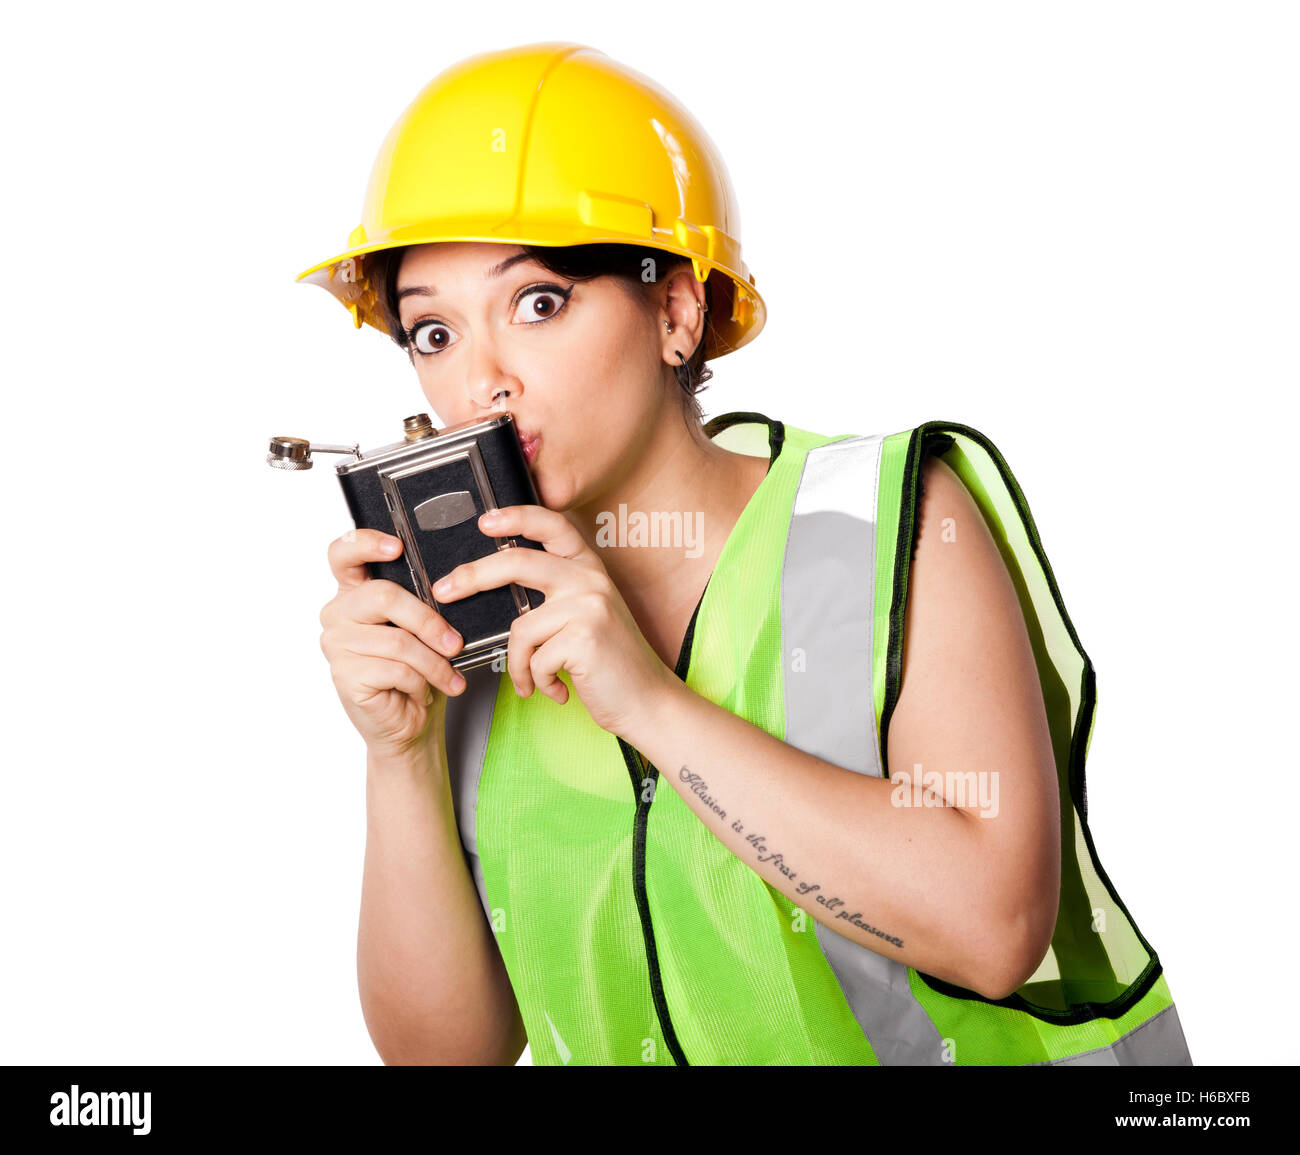 Caucasian young adult woman in her mid 20s wearing reflective yellow safety helmet and safety vest, kissing a hip flask. Isolate Stock Photo